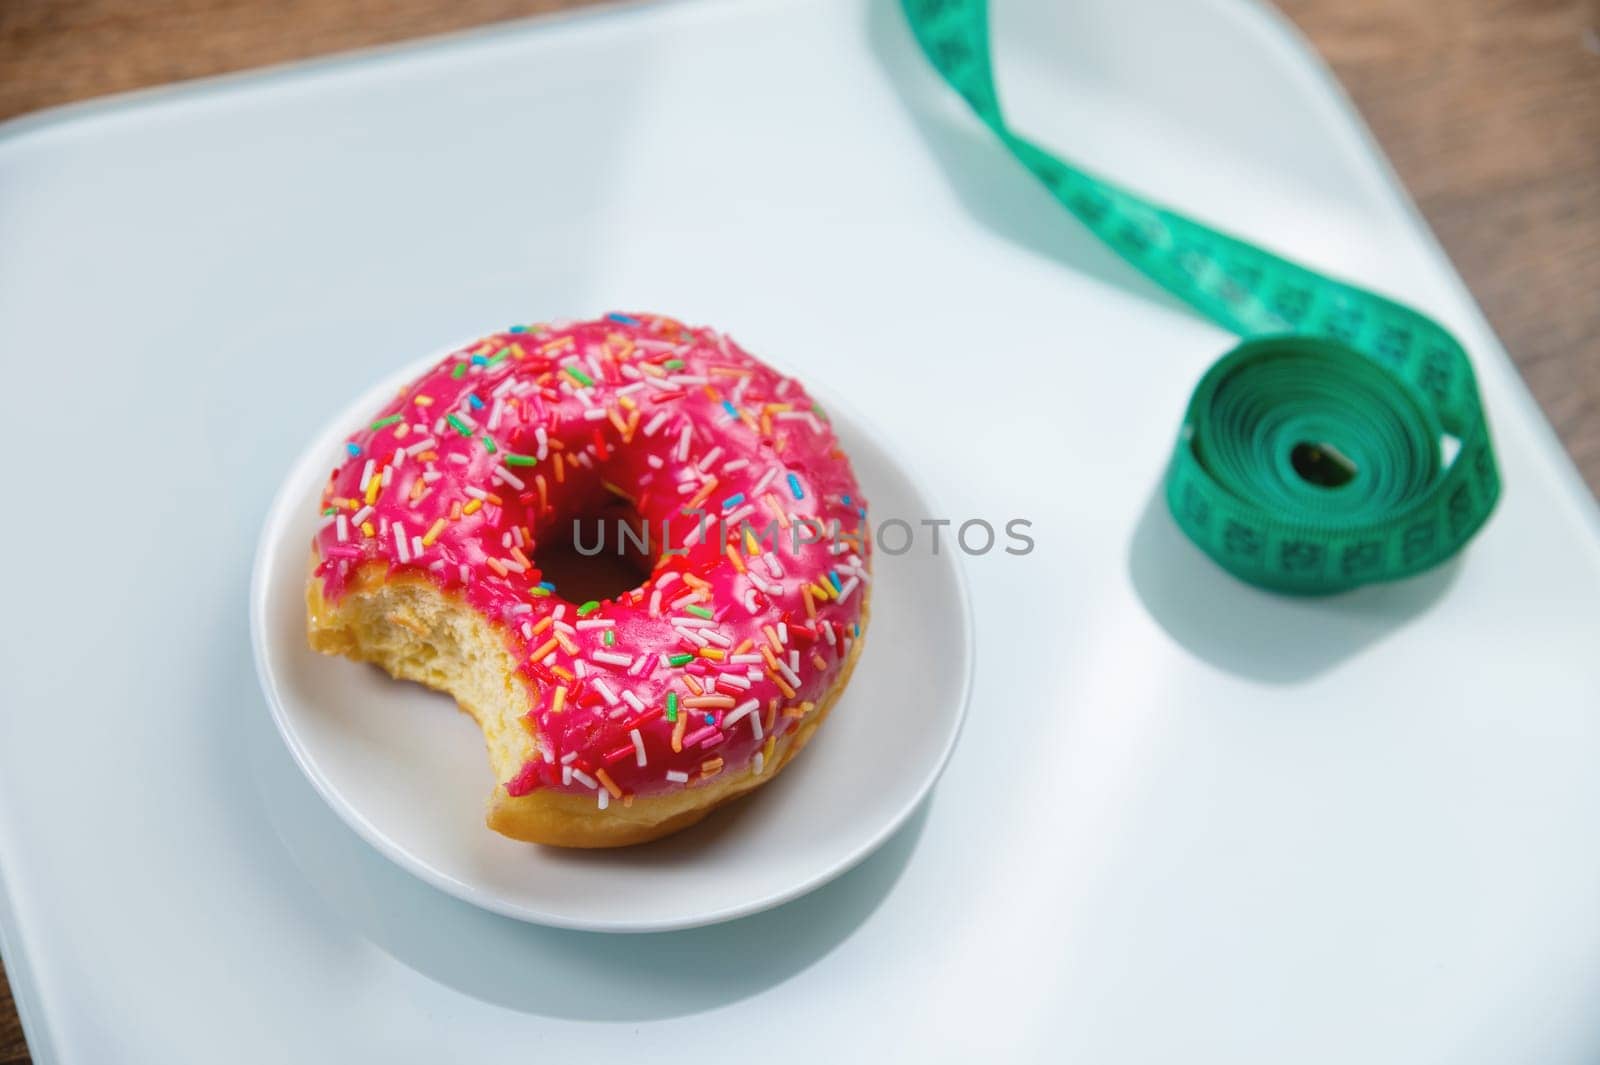 A bitten sweet donut and a measuring tape. Unhealthy eating and obesity concept.